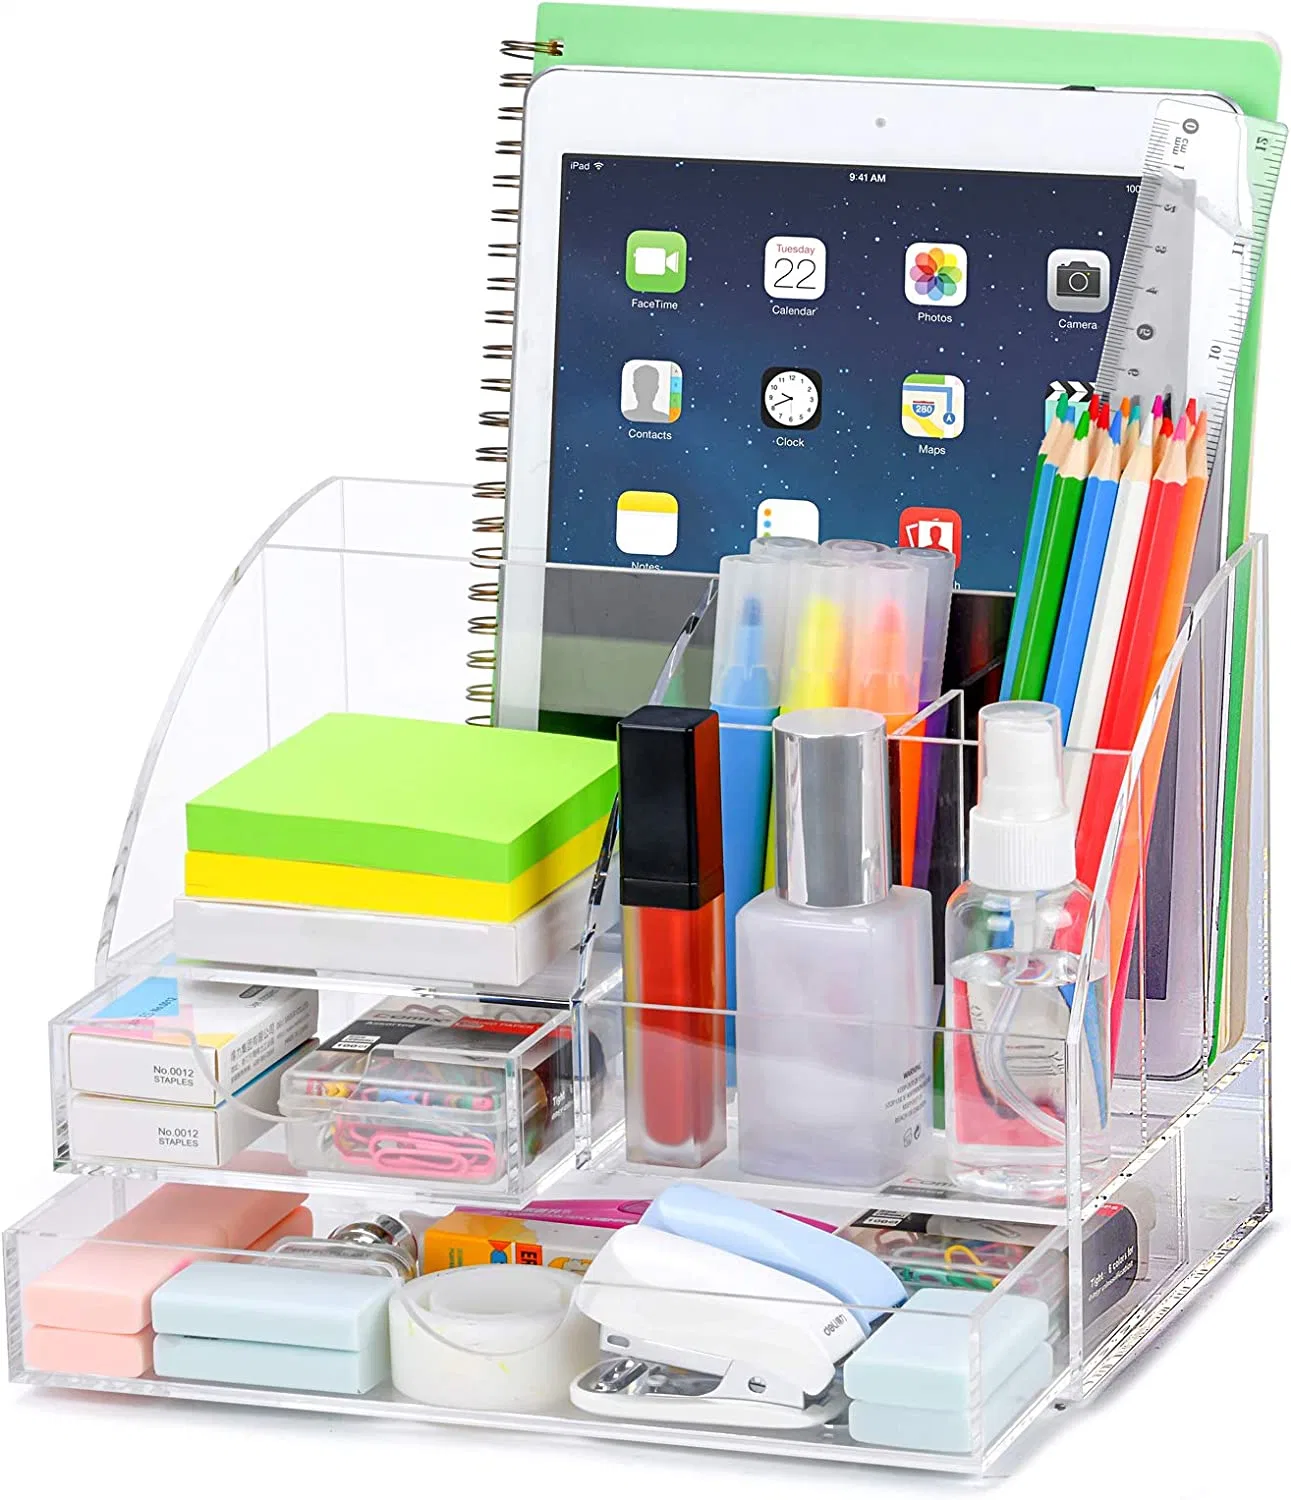 All in One Office Supplies Accessories with 2 Drawers Organization